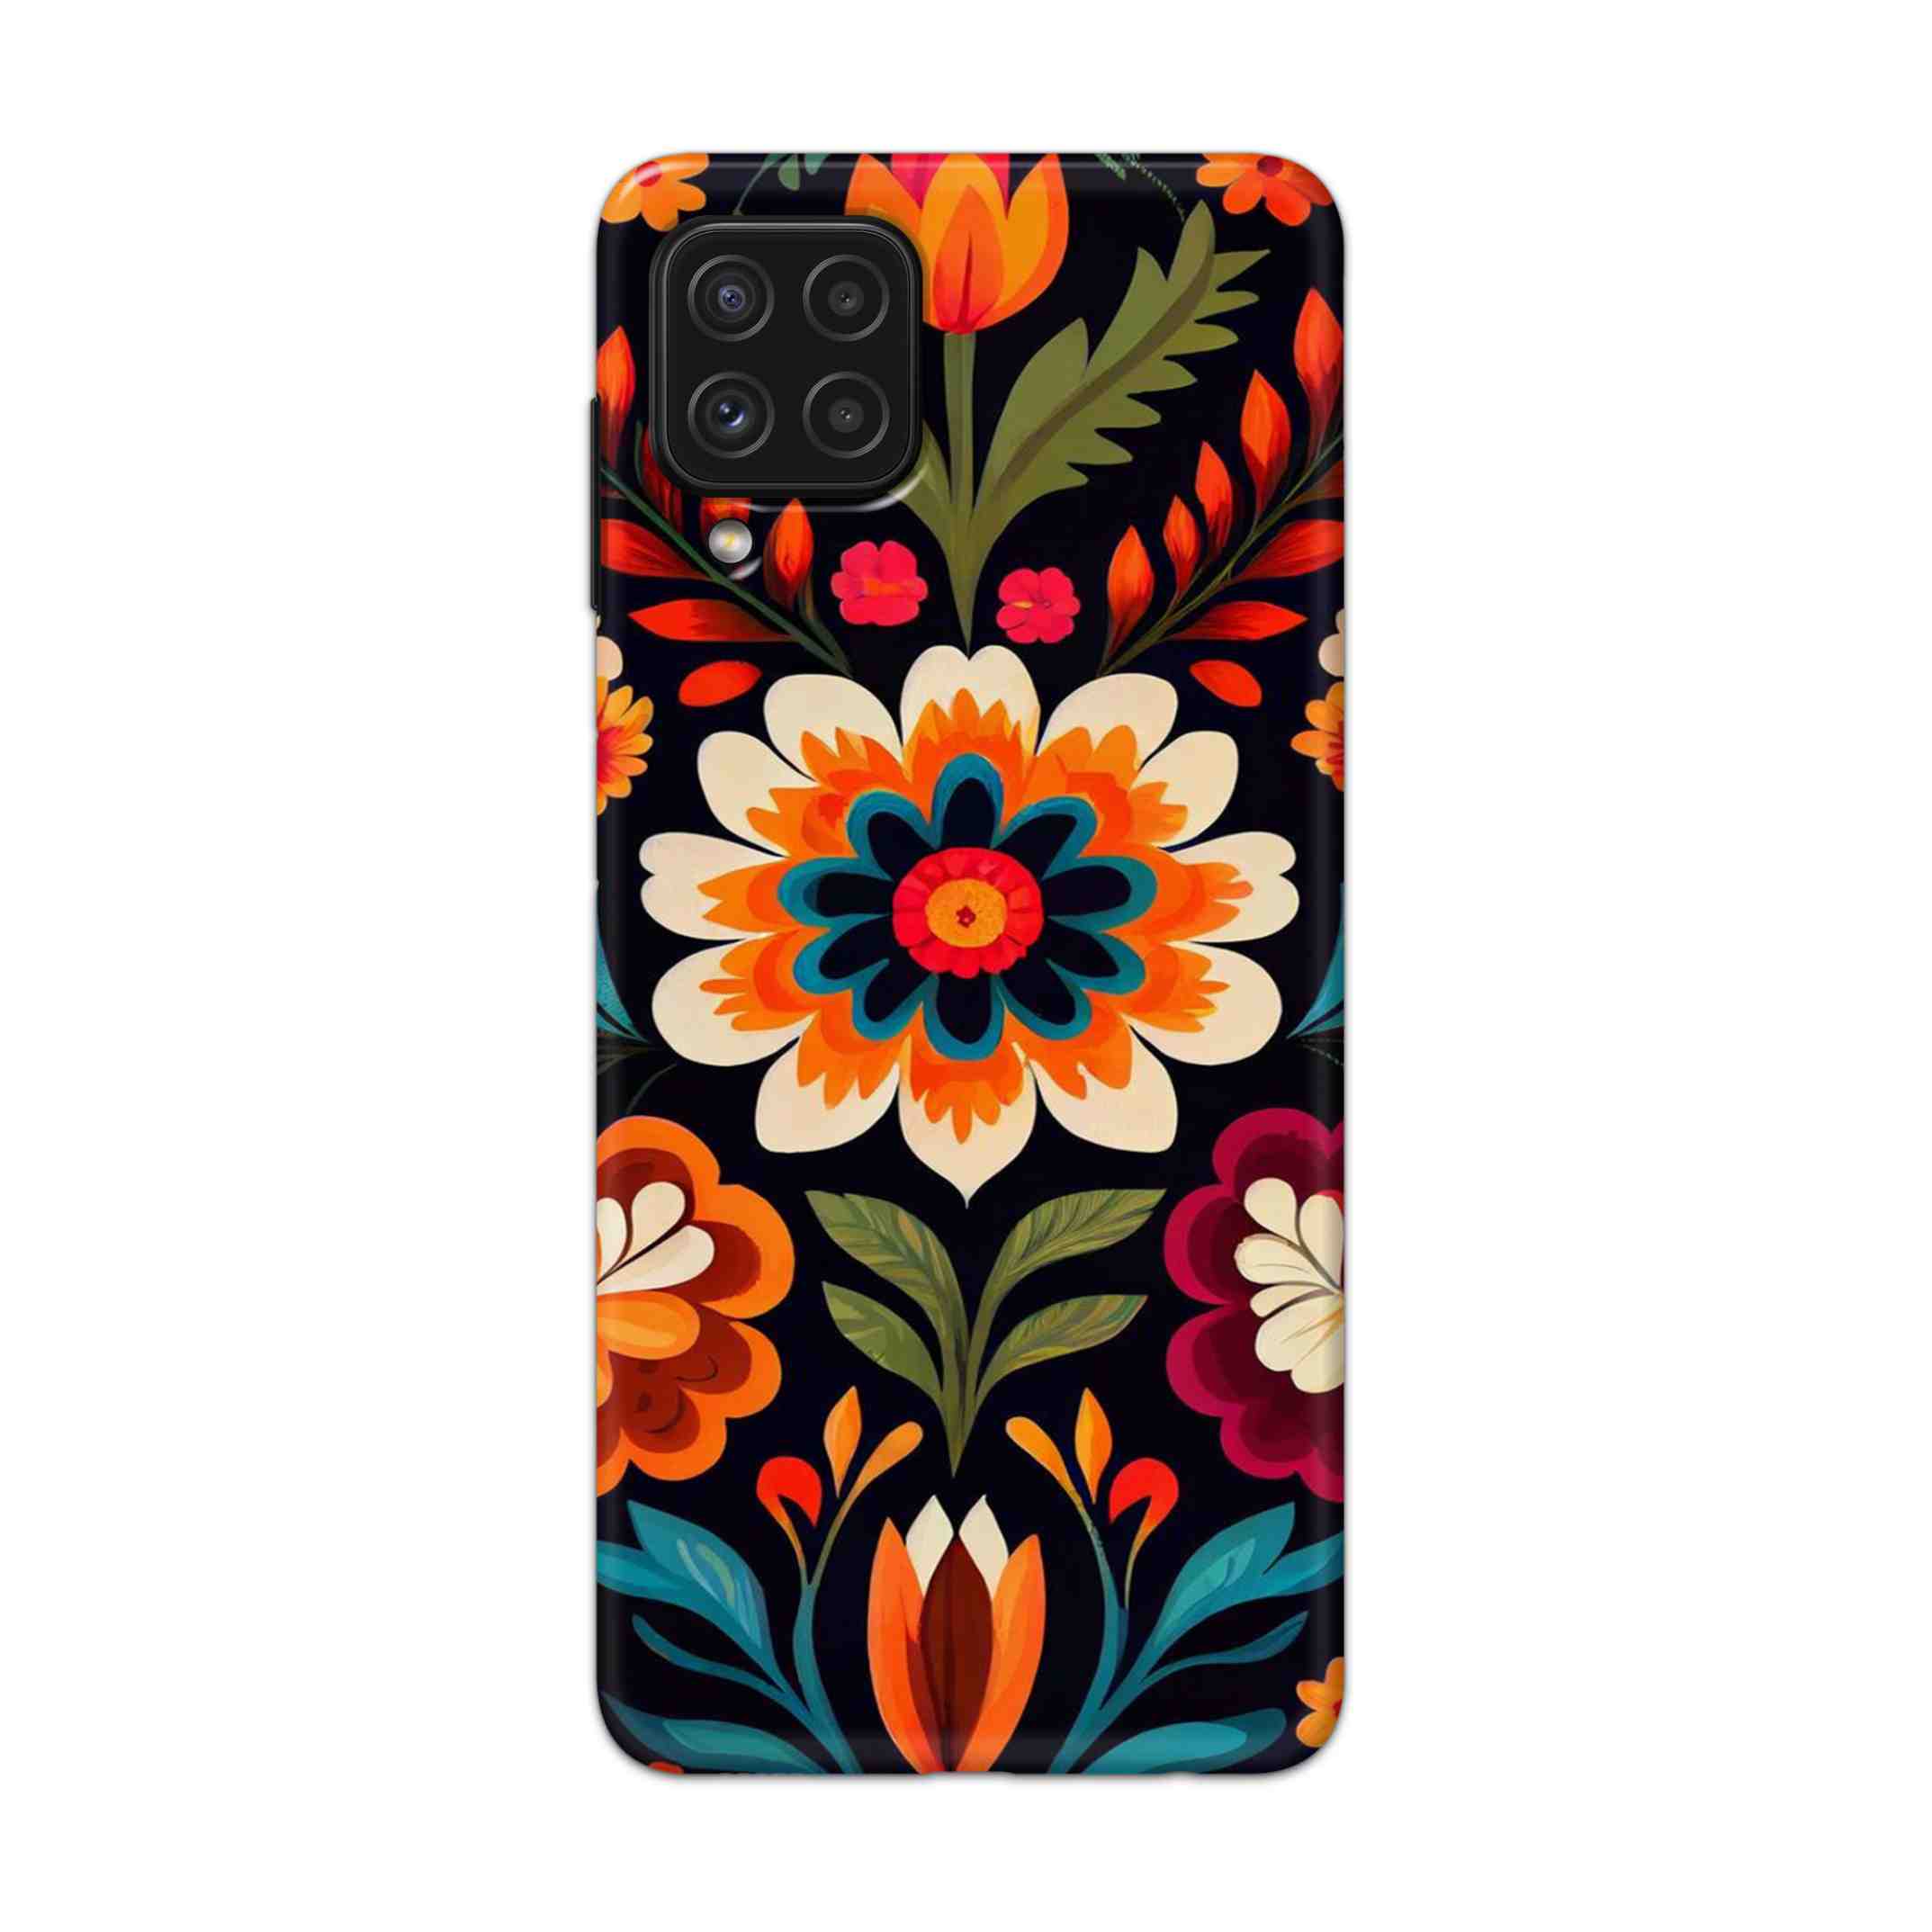 Buy Flower Hard Back Mobile Phone Case Cover For Samsung Galaxy A22 Online